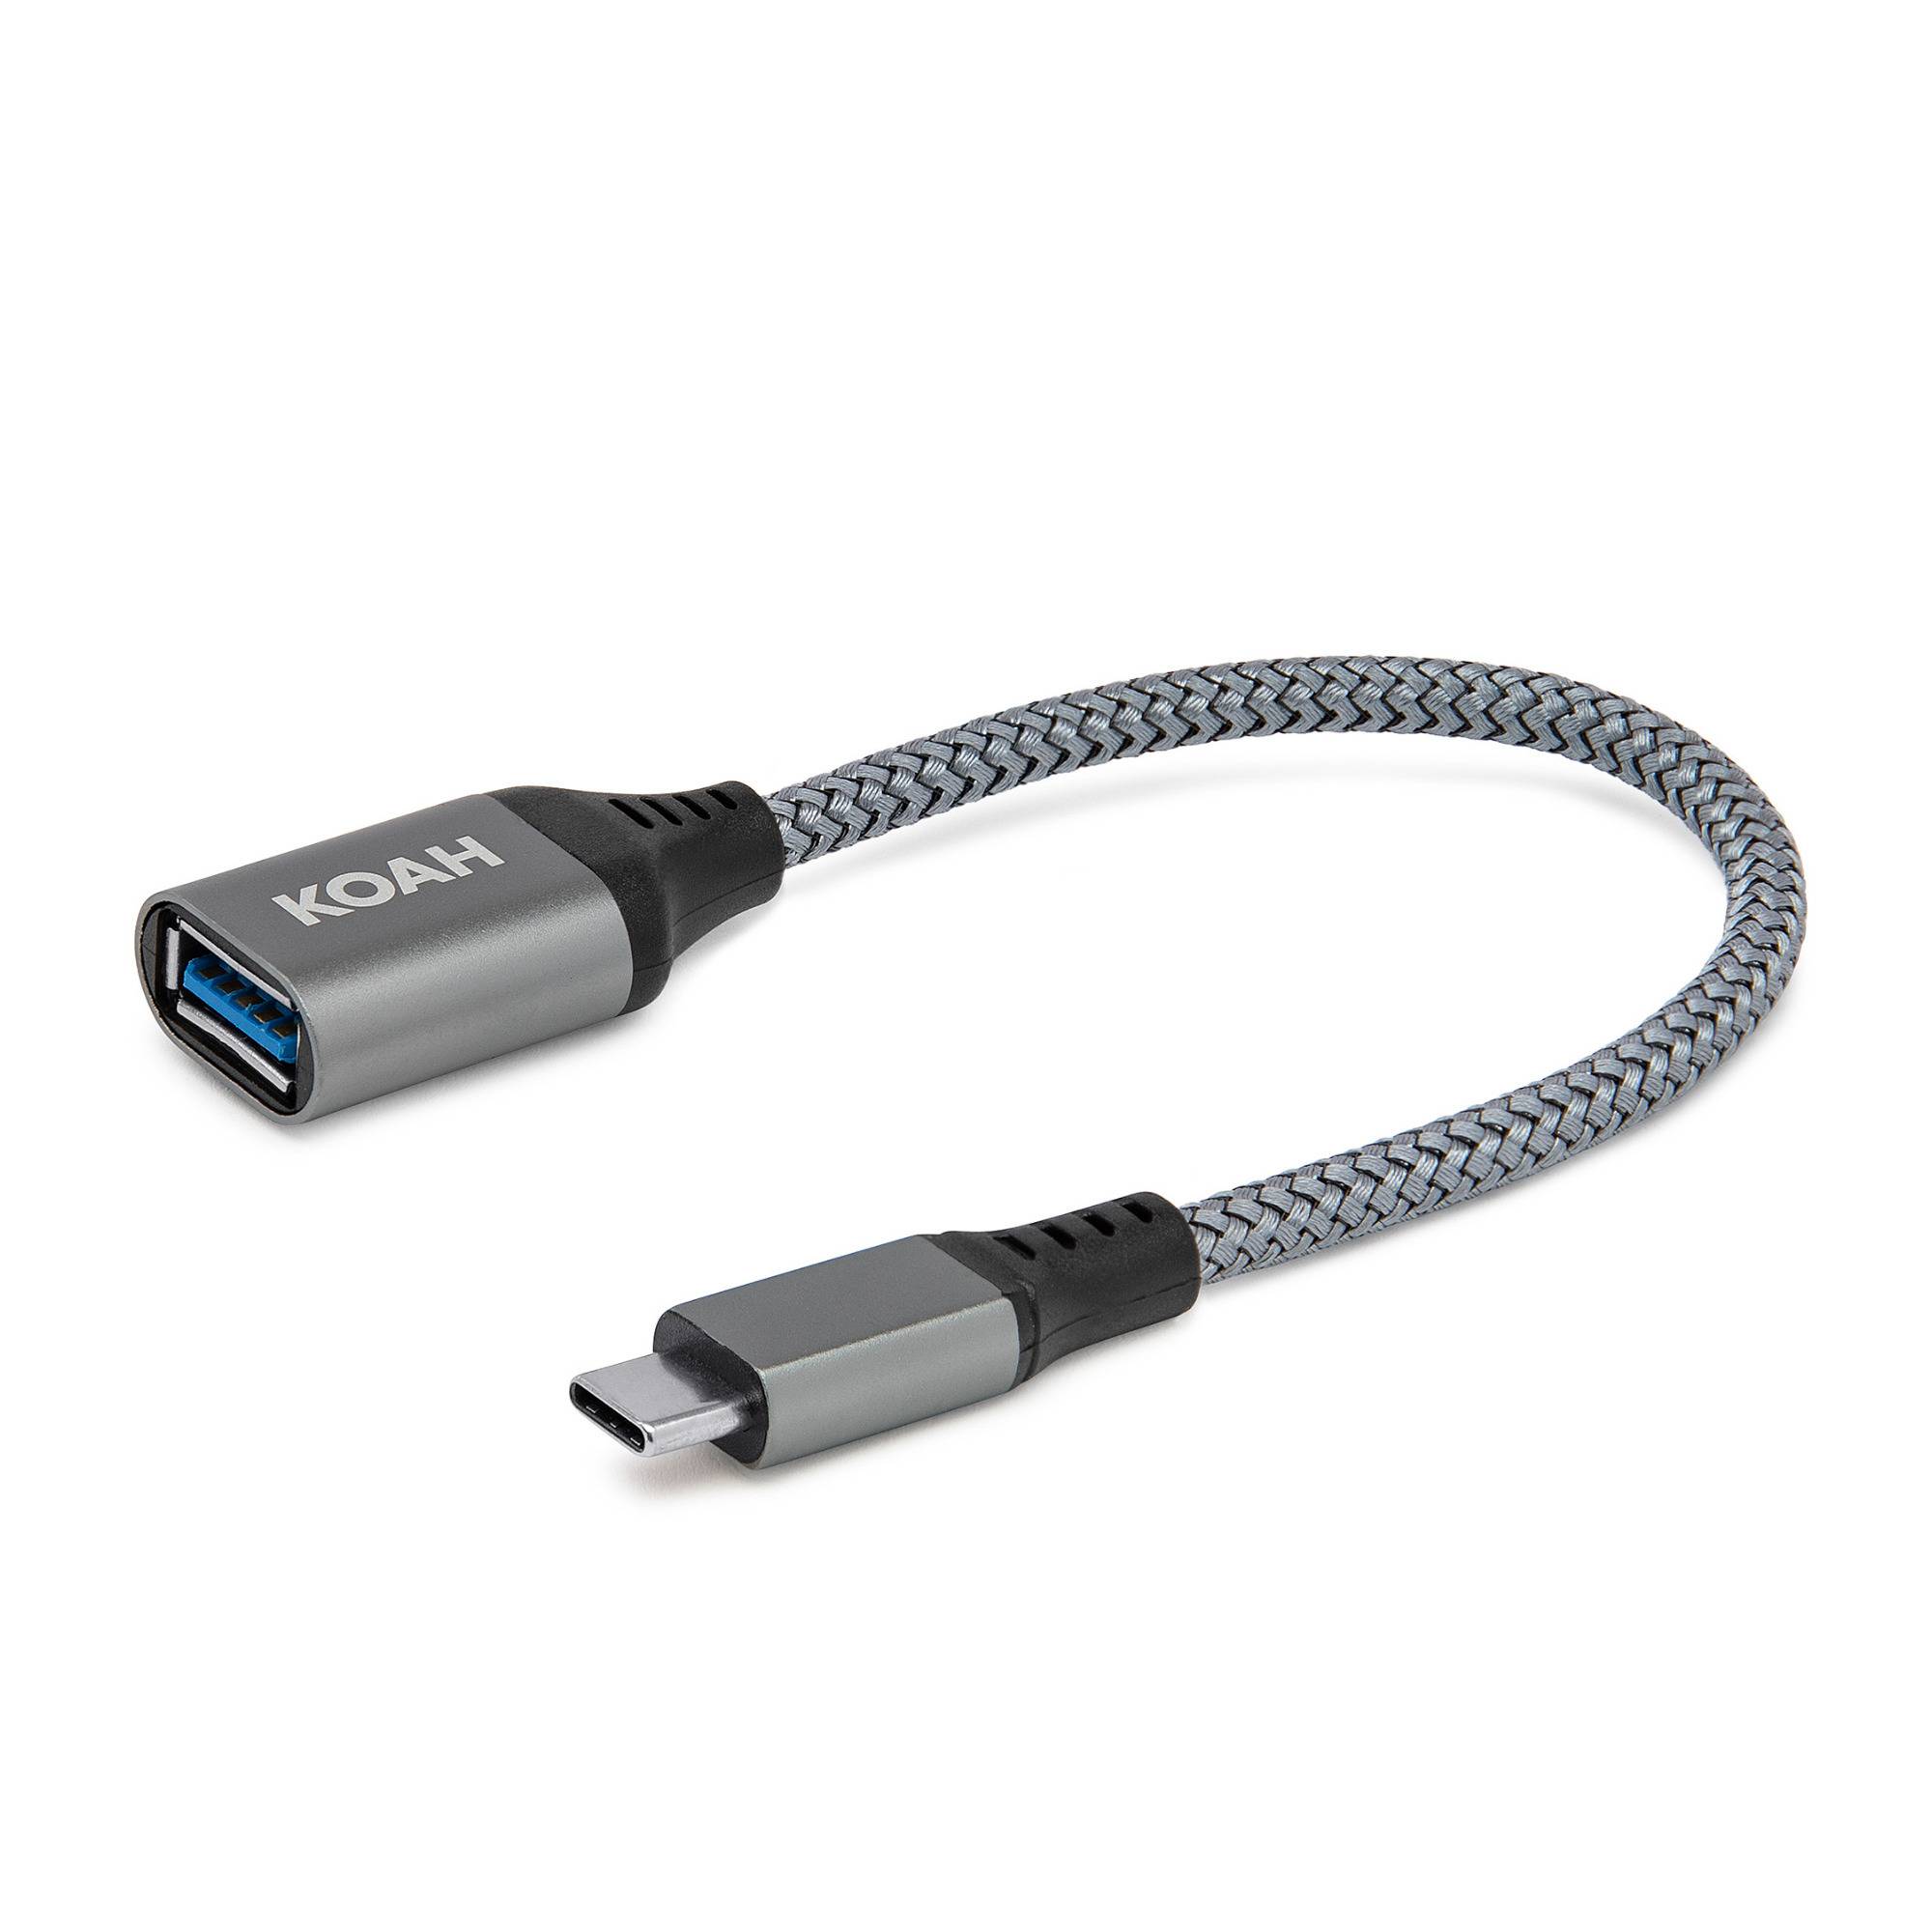 Koah USB 3.0 to USB-C Adapter (Up to 5Gbps Data Transfer Speeds)